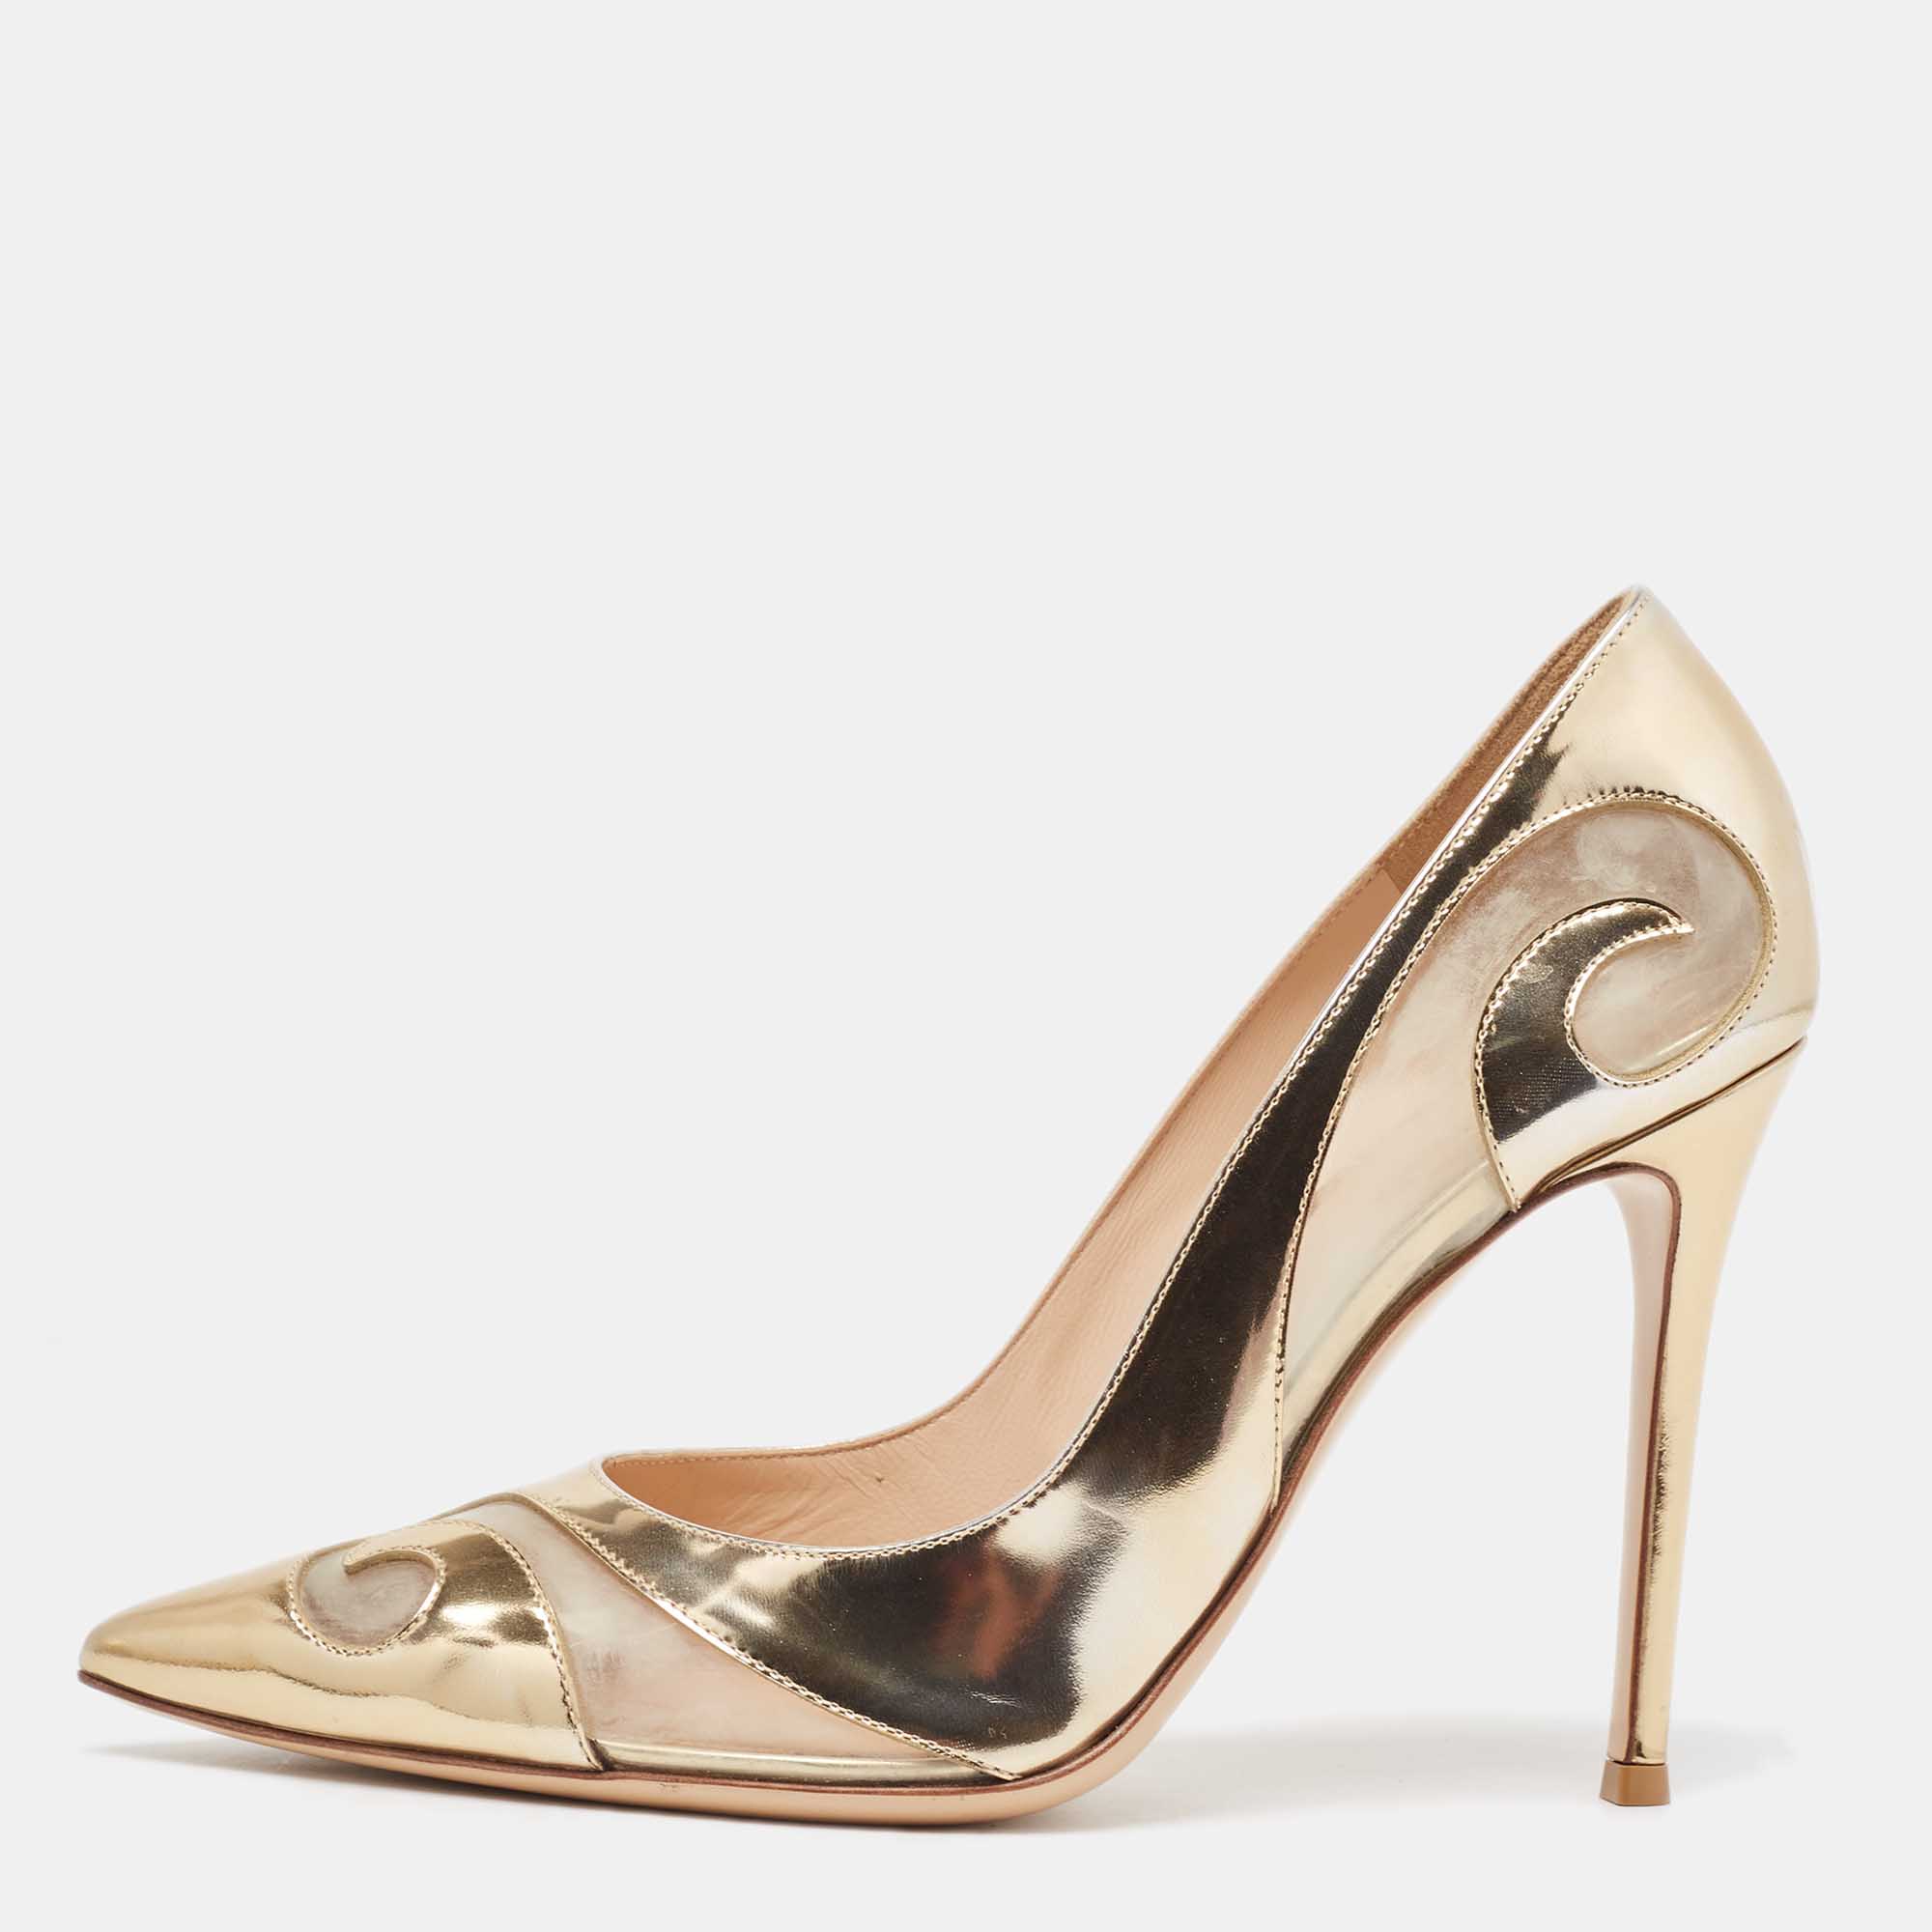 Gianvito rossi metallic gold pvc and leather pointed toe pumps size 41